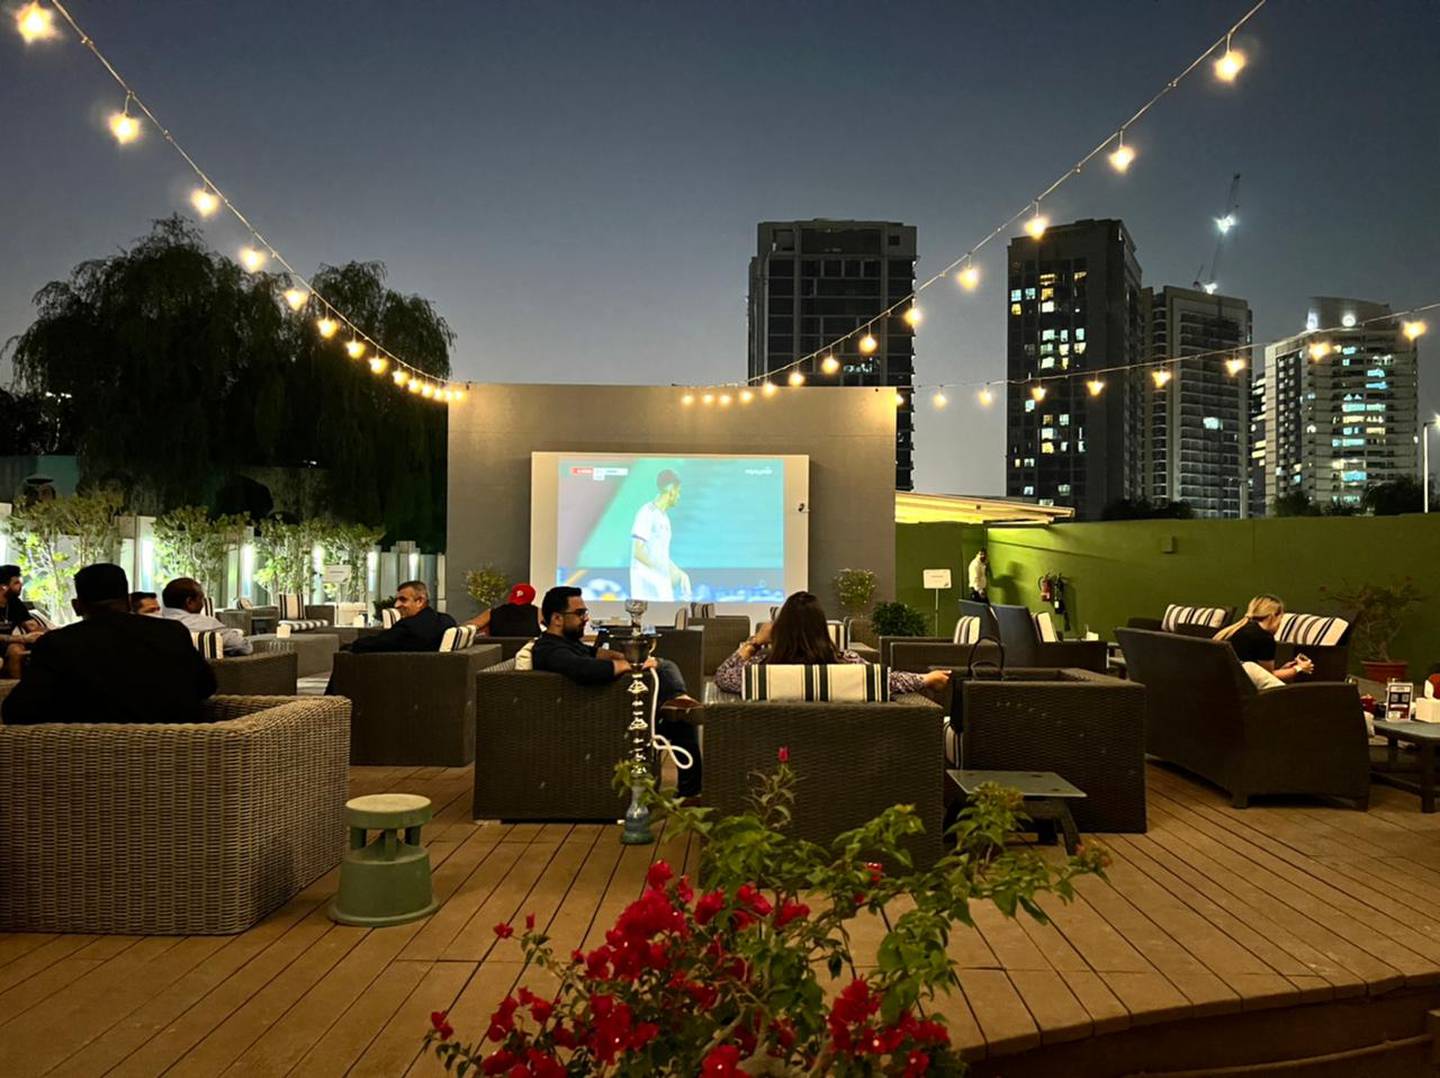 There are eight indoor screens and one outdoor projector at Stock Burger Co. Photo: Holiday Inn